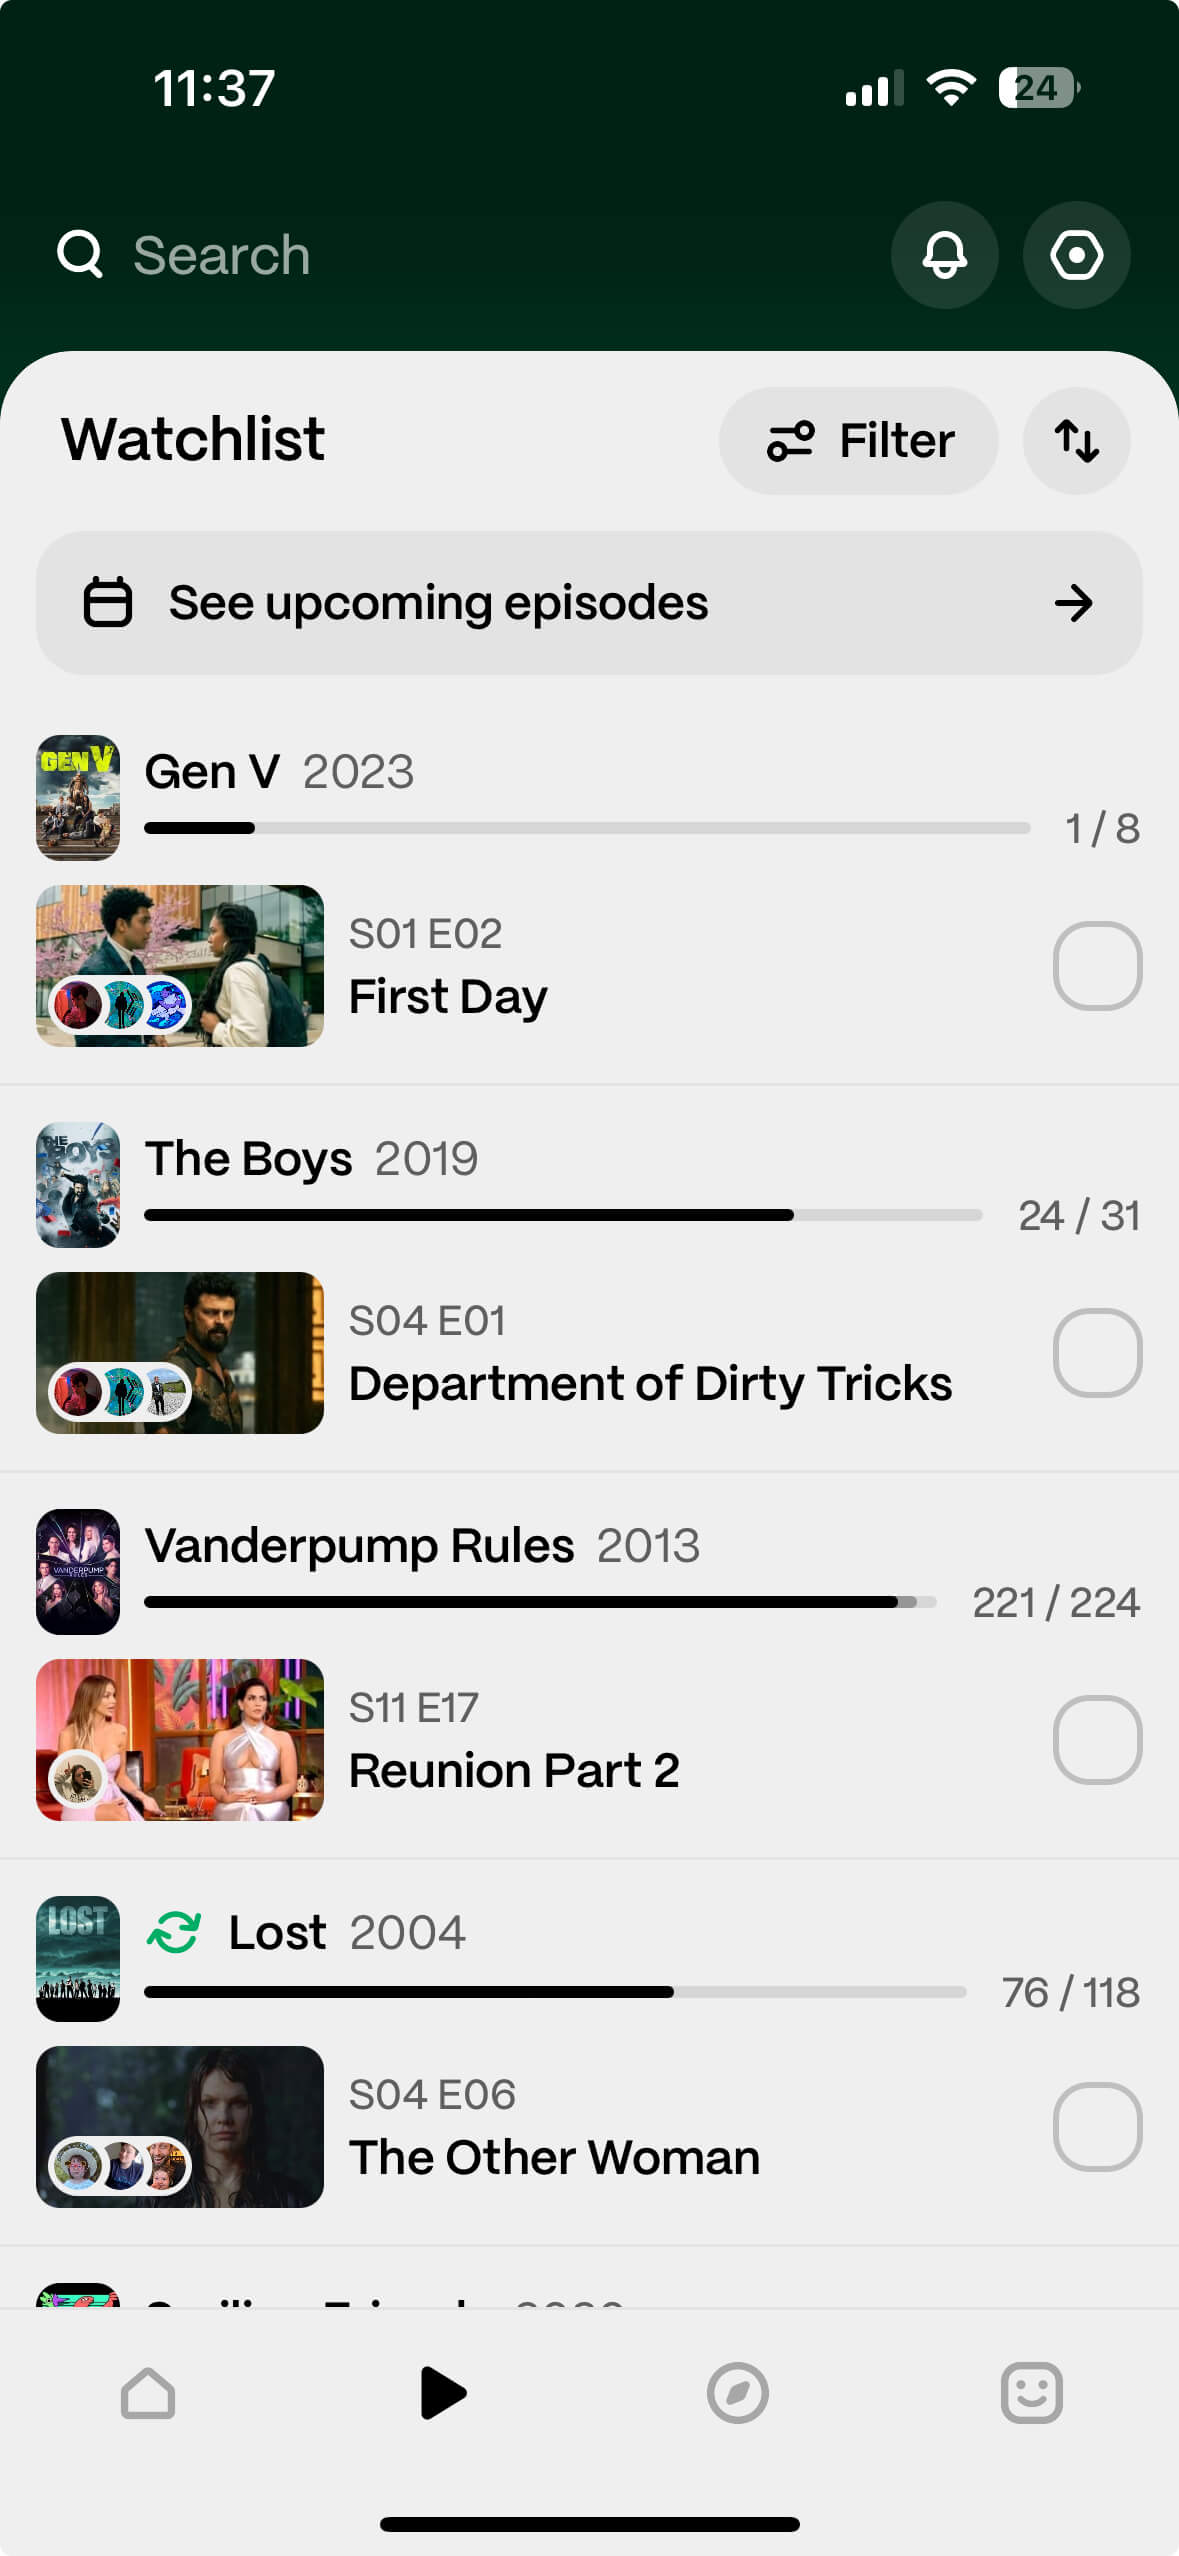 The Watchlist screen of Marathon's iOS app, showing a list of next episodes to watch and your progress.